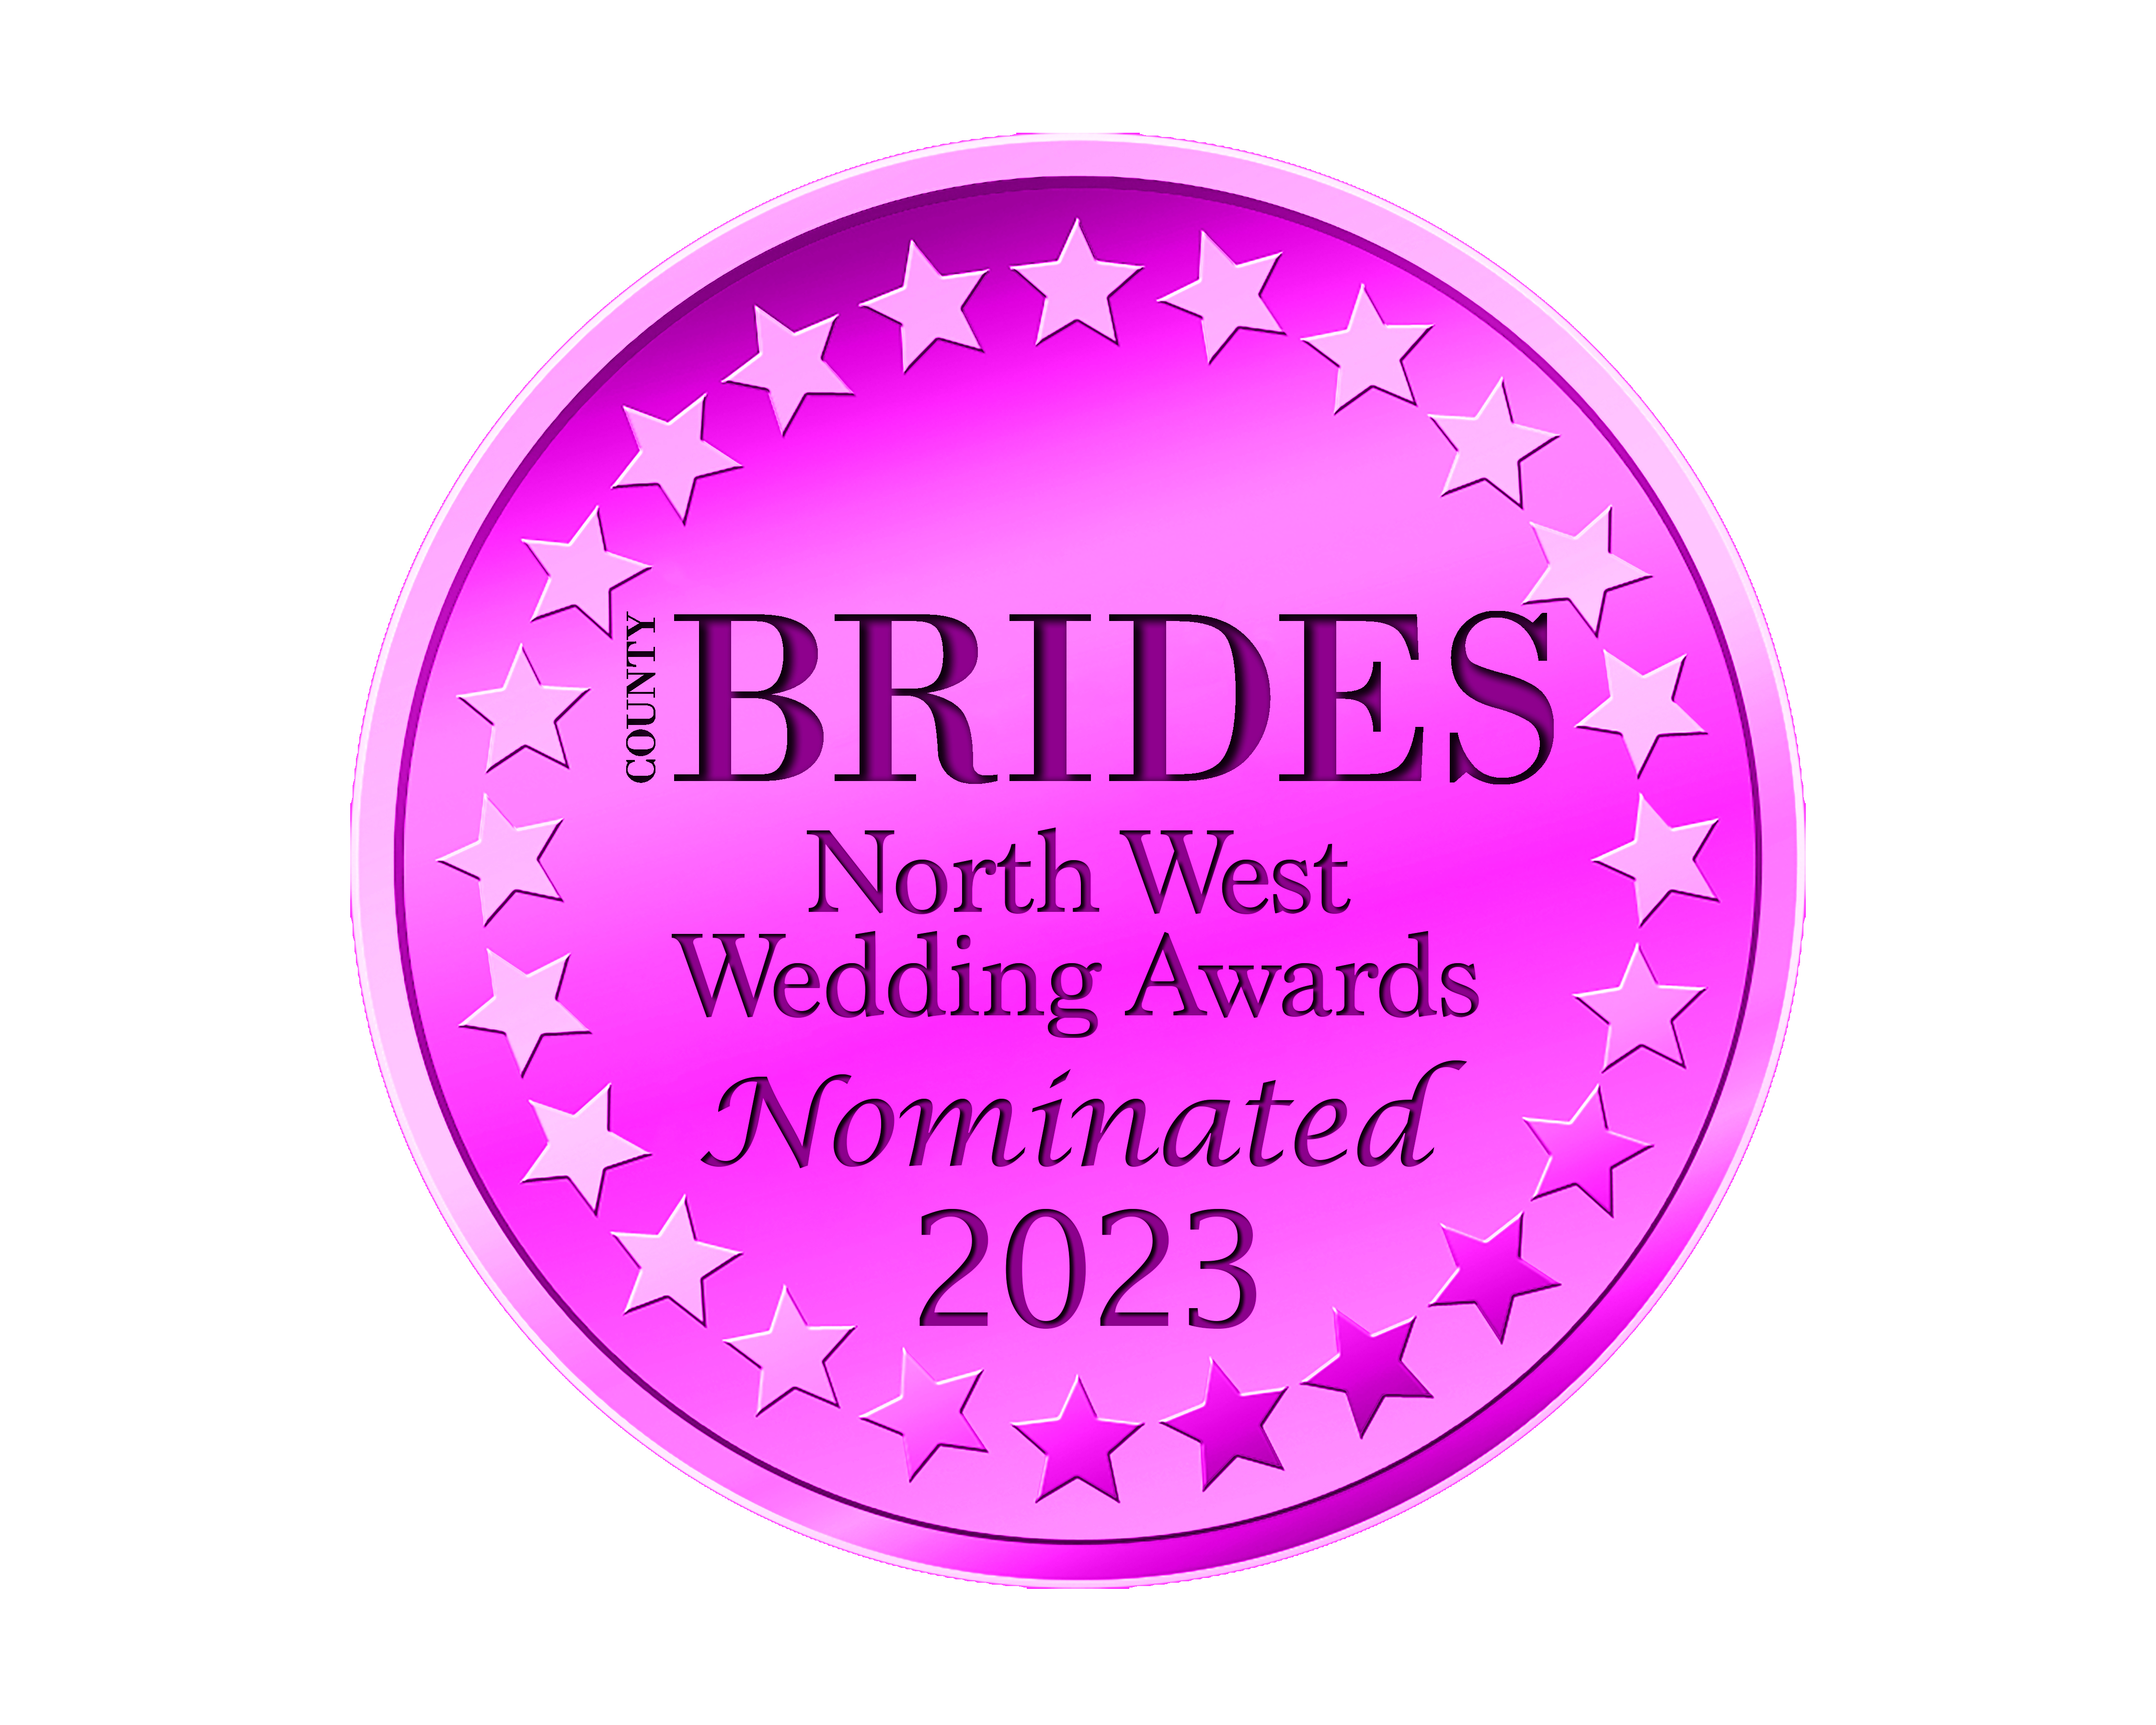 We have been nominated in the County Brides North West Wedding Awards 2023